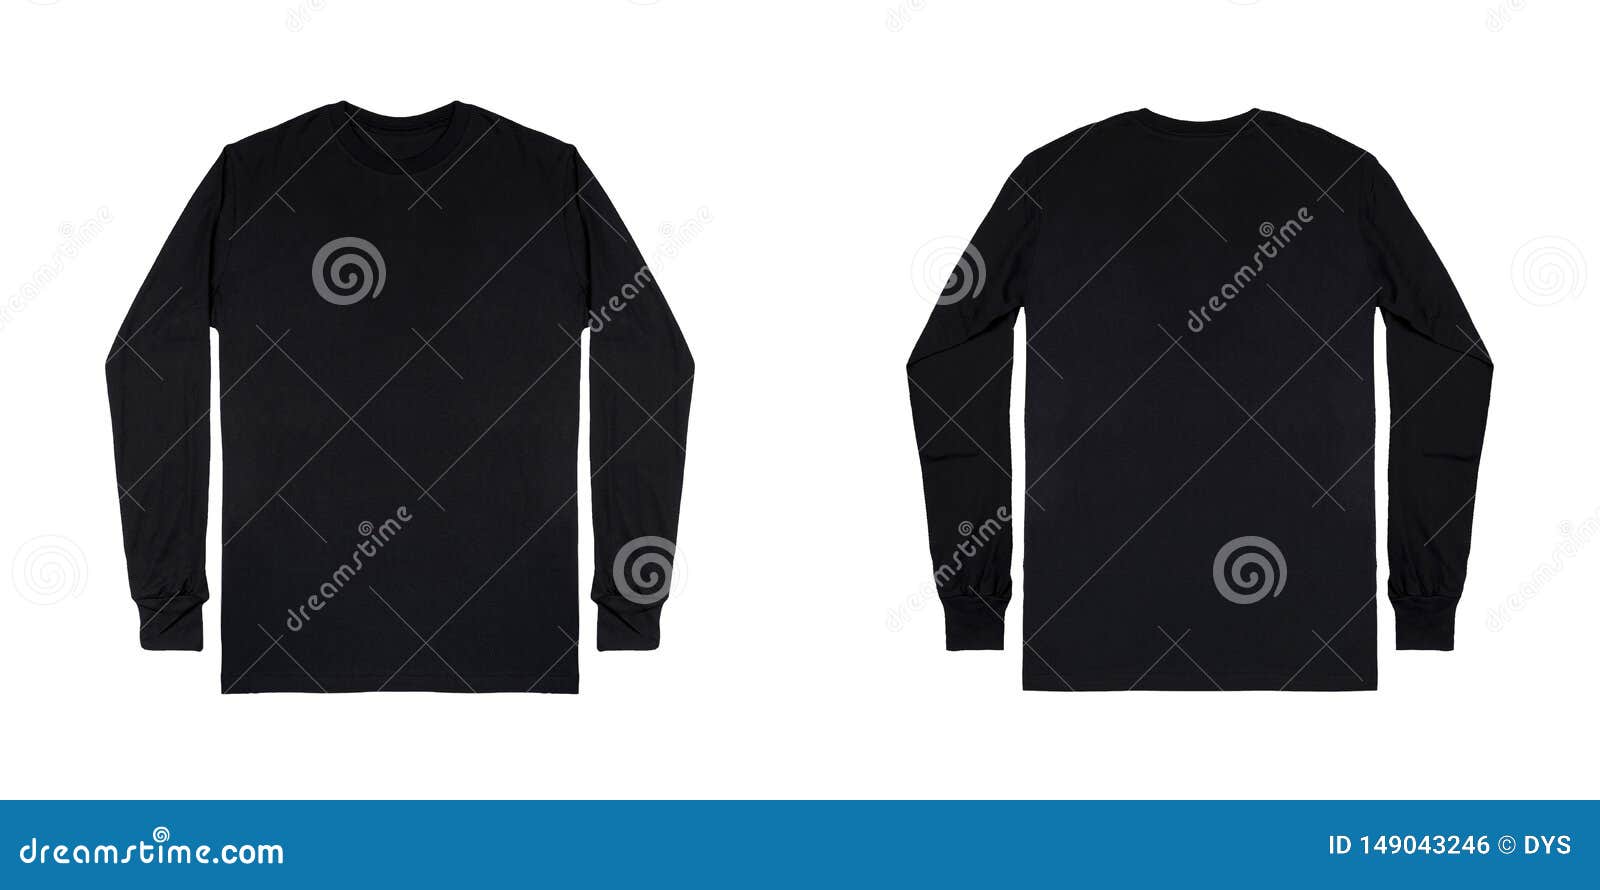 Black Long Sleeve T Shirt in Front and Back View Isolated on White  Background Stock Photo - Image of style, plain: 149043246